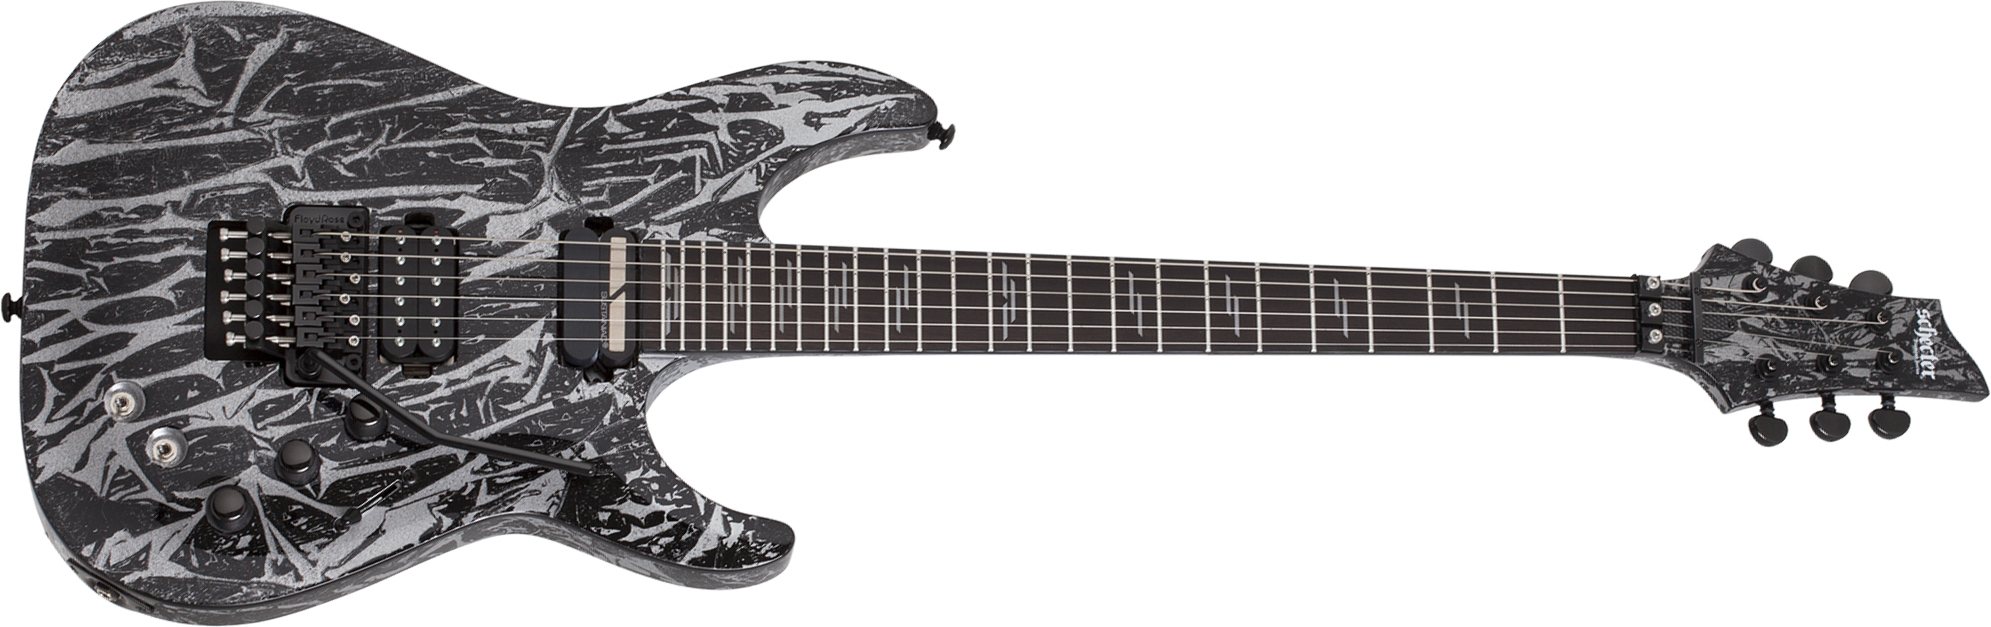 Schecter C-1 Fr  S Silver Mountain 2h Sustainiac Ht Eb - Silver Mountain - Str shape electric guitar - Main picture